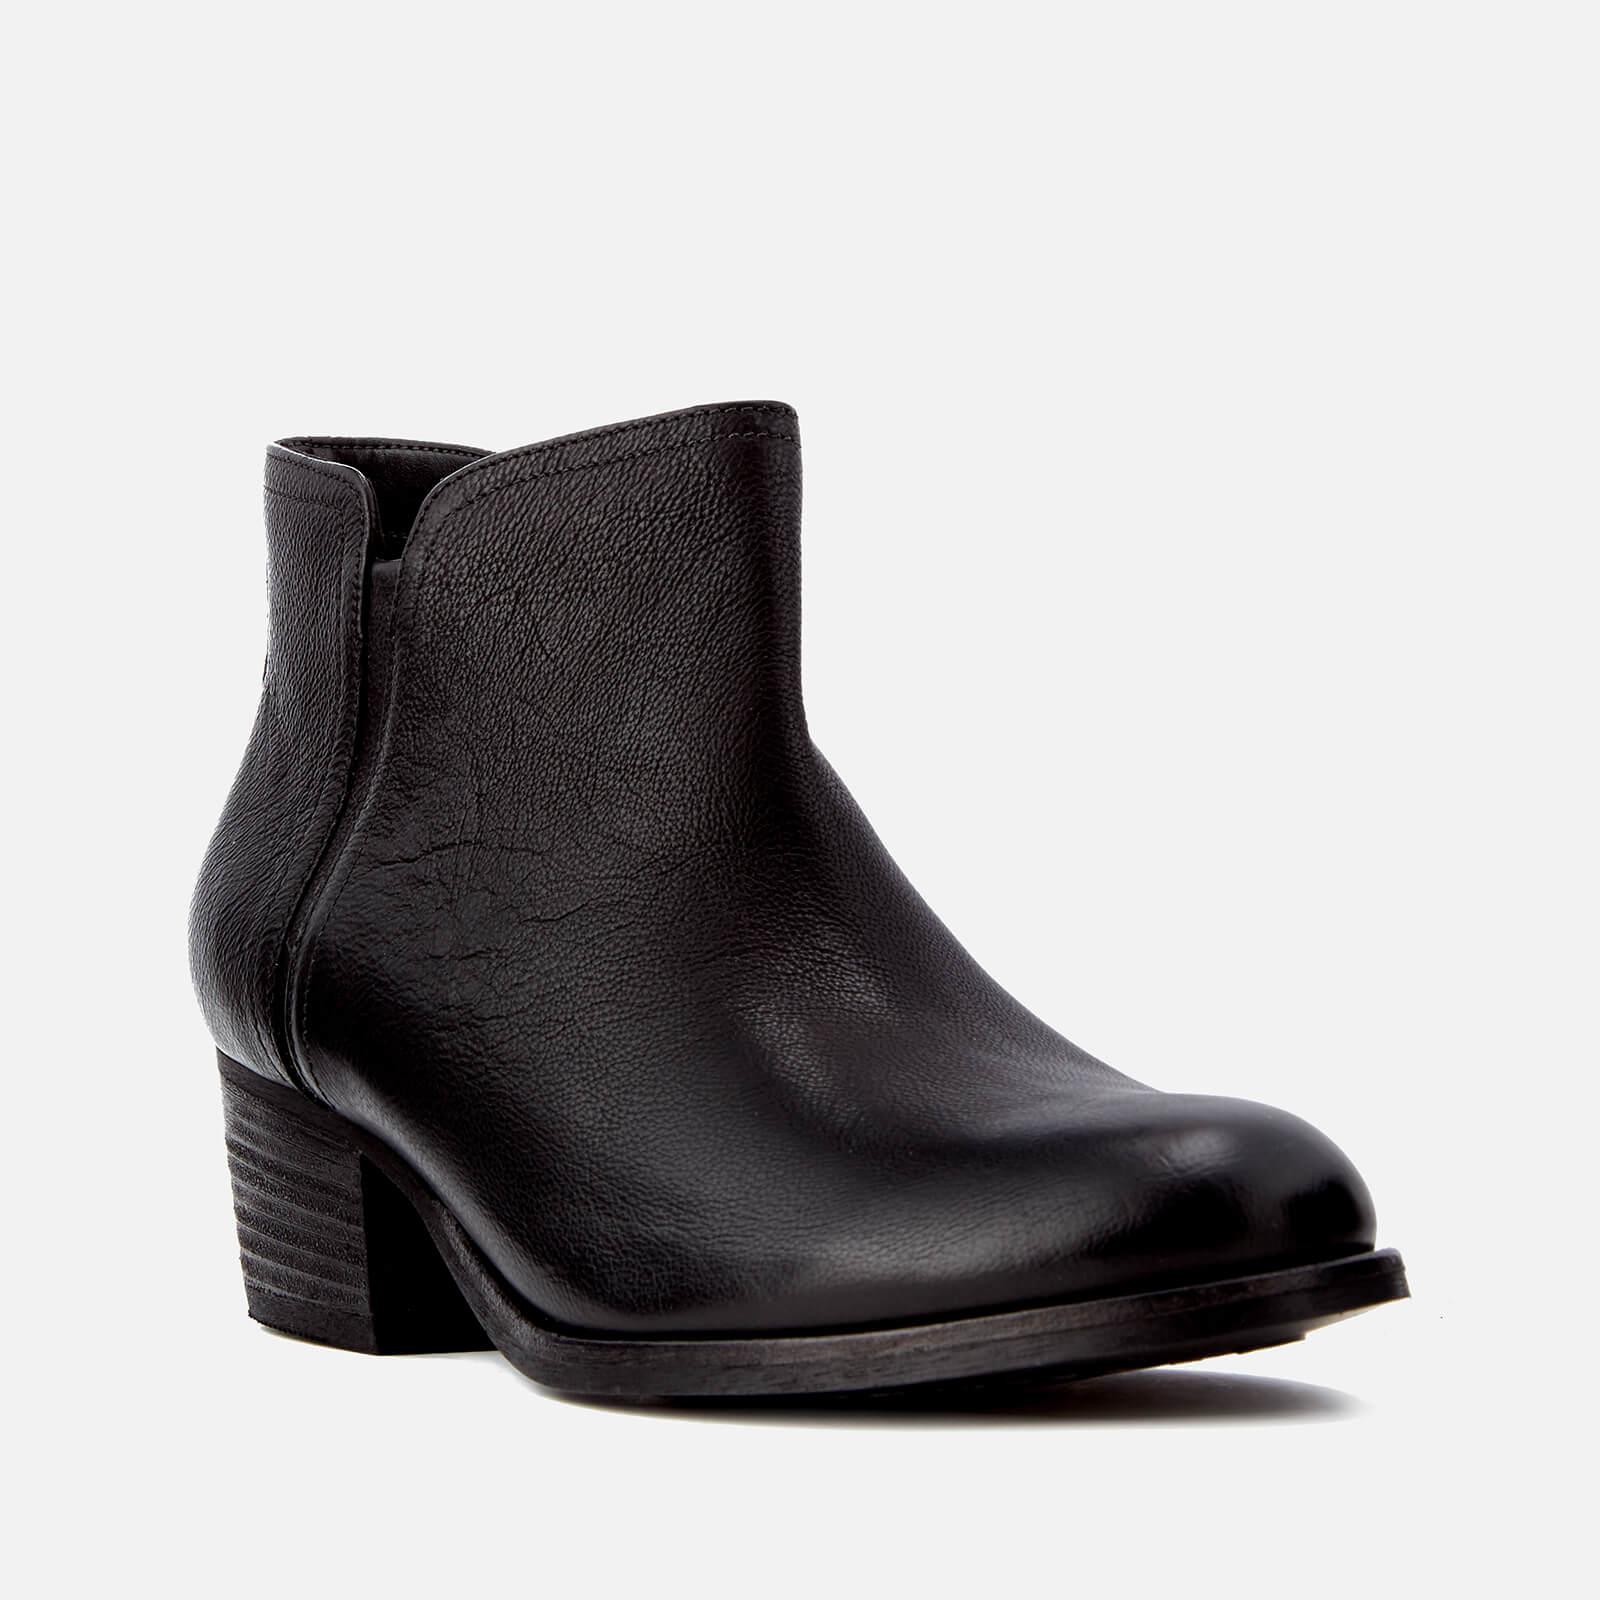 Lyst - Clarks Women's Maypearl Ramie Leather Ankle Boots in Black